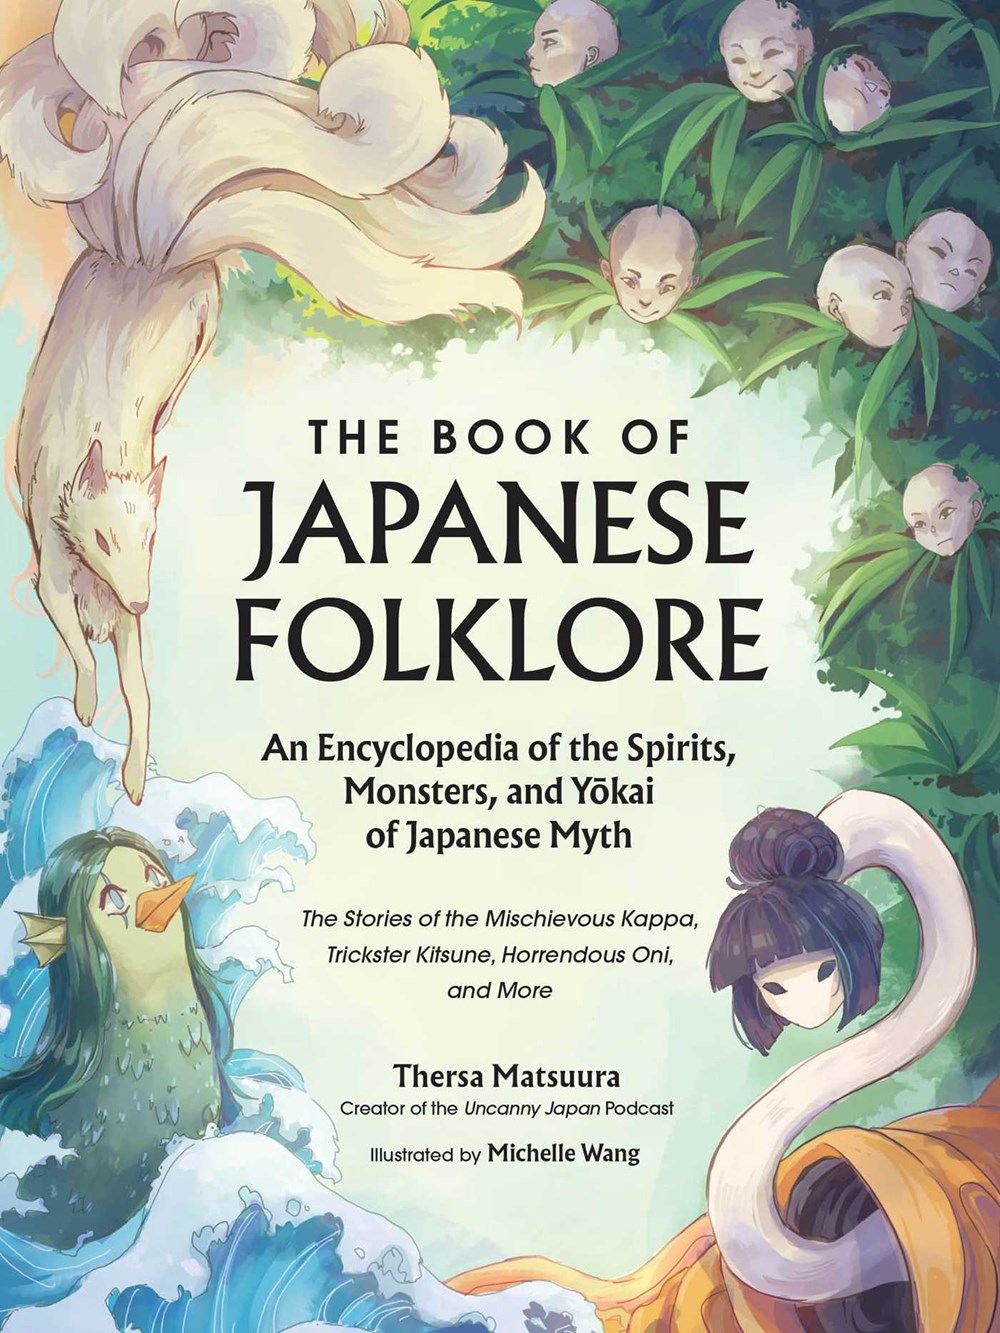 The Book of Japanese Folklore: An Encyclopedia of the Spirits, Monsters, and Yokai of Japanese Myth (Hardcover) image count 0